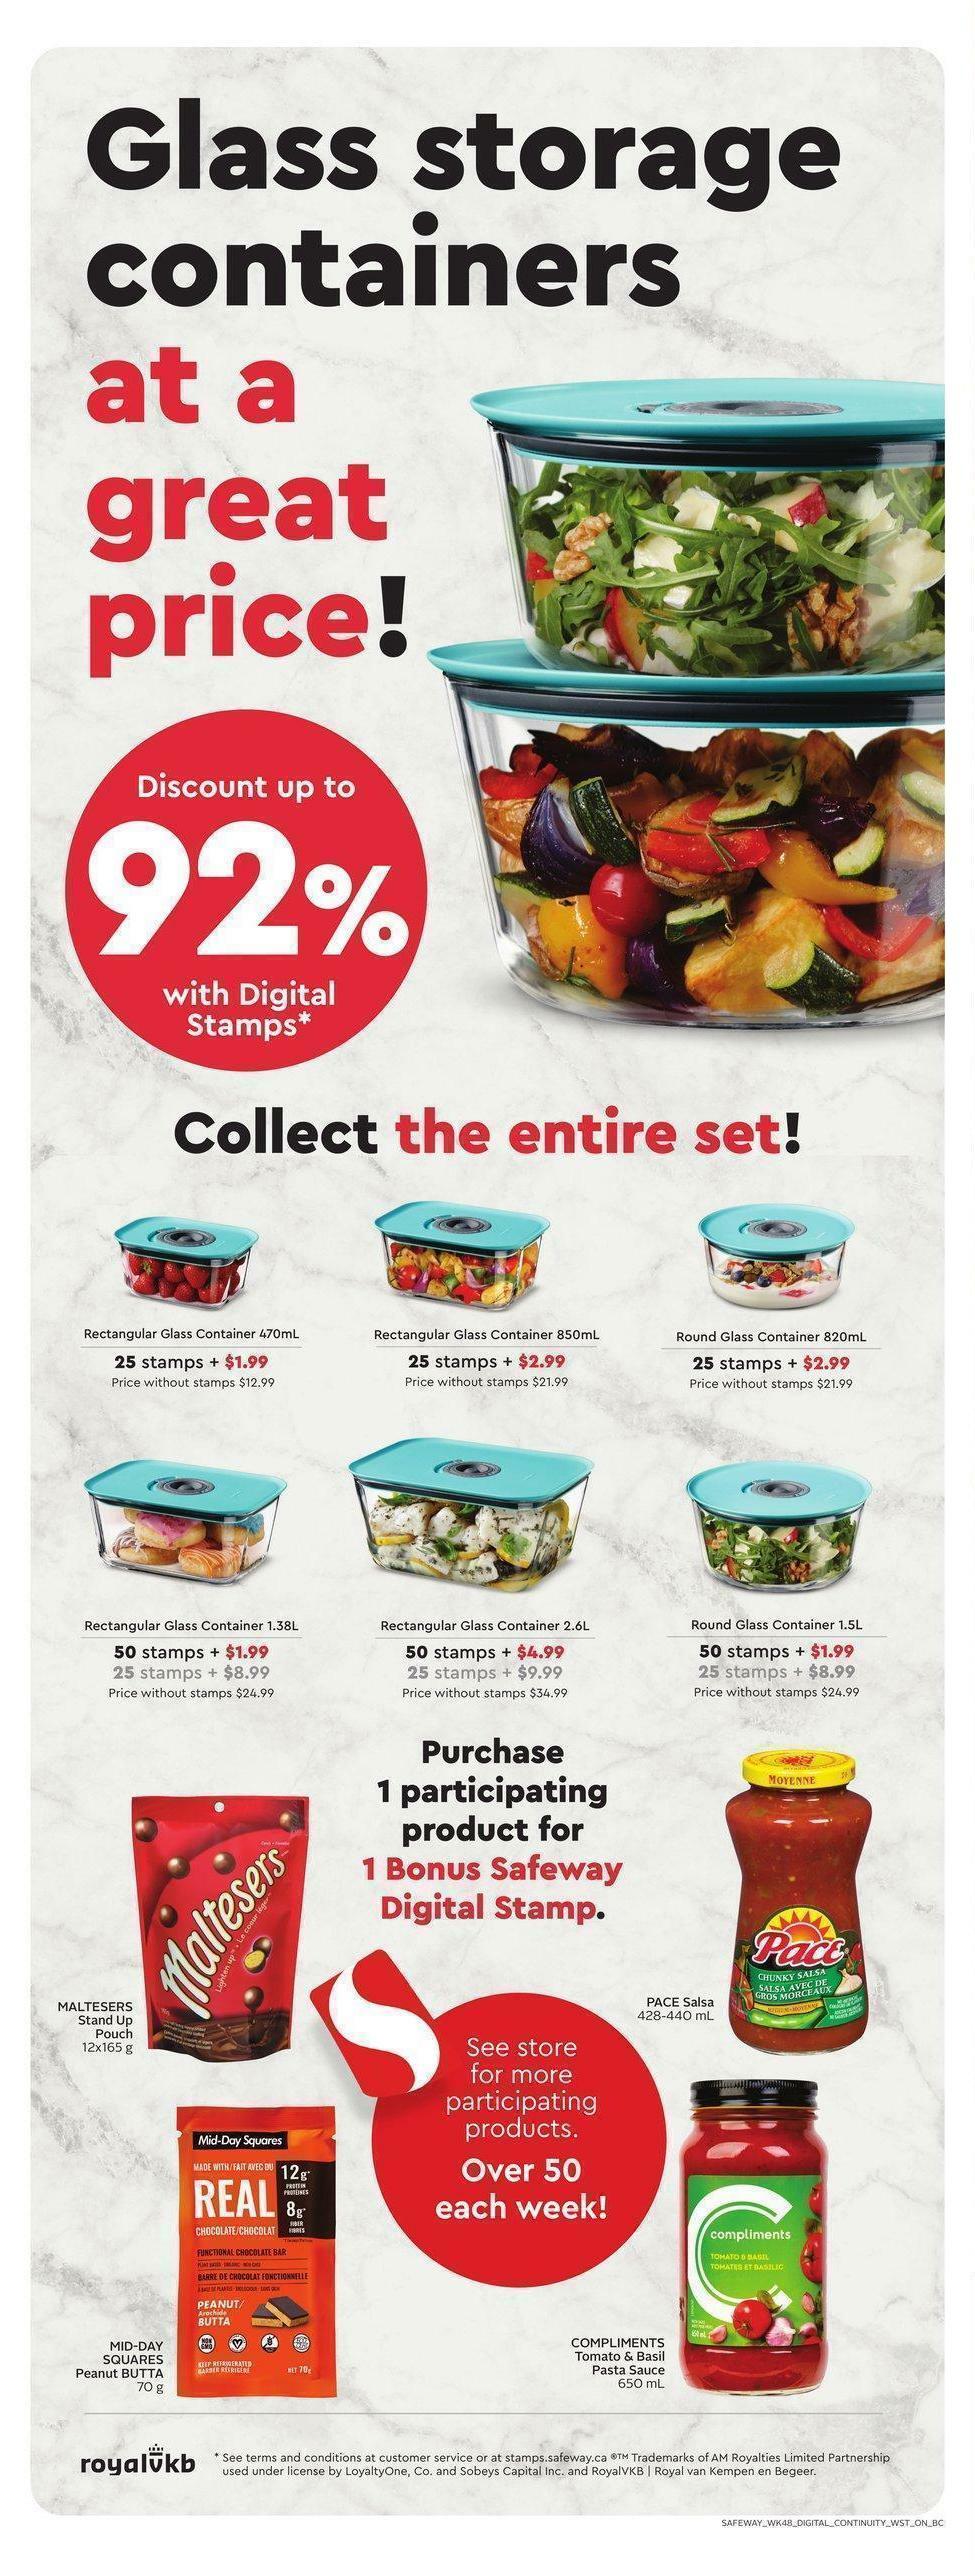 Safeway Flyer from March 24